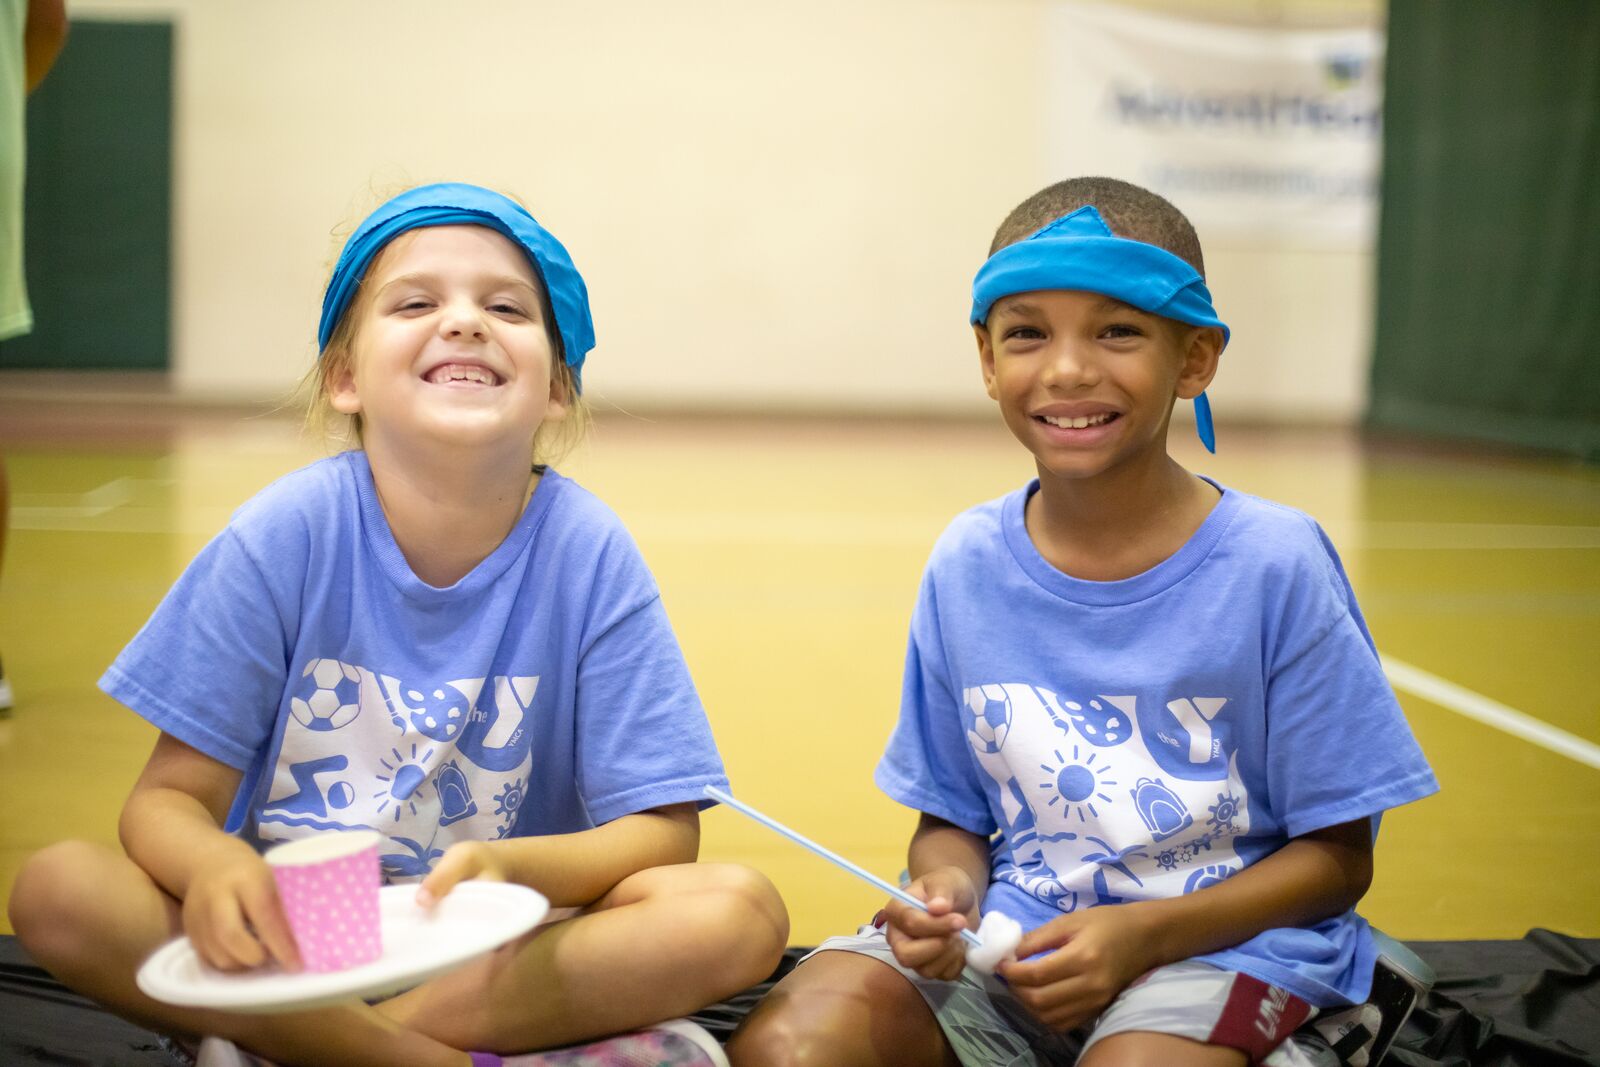 Two children wearing summer camp shirts while smiling in a gym and holding plates of lunch